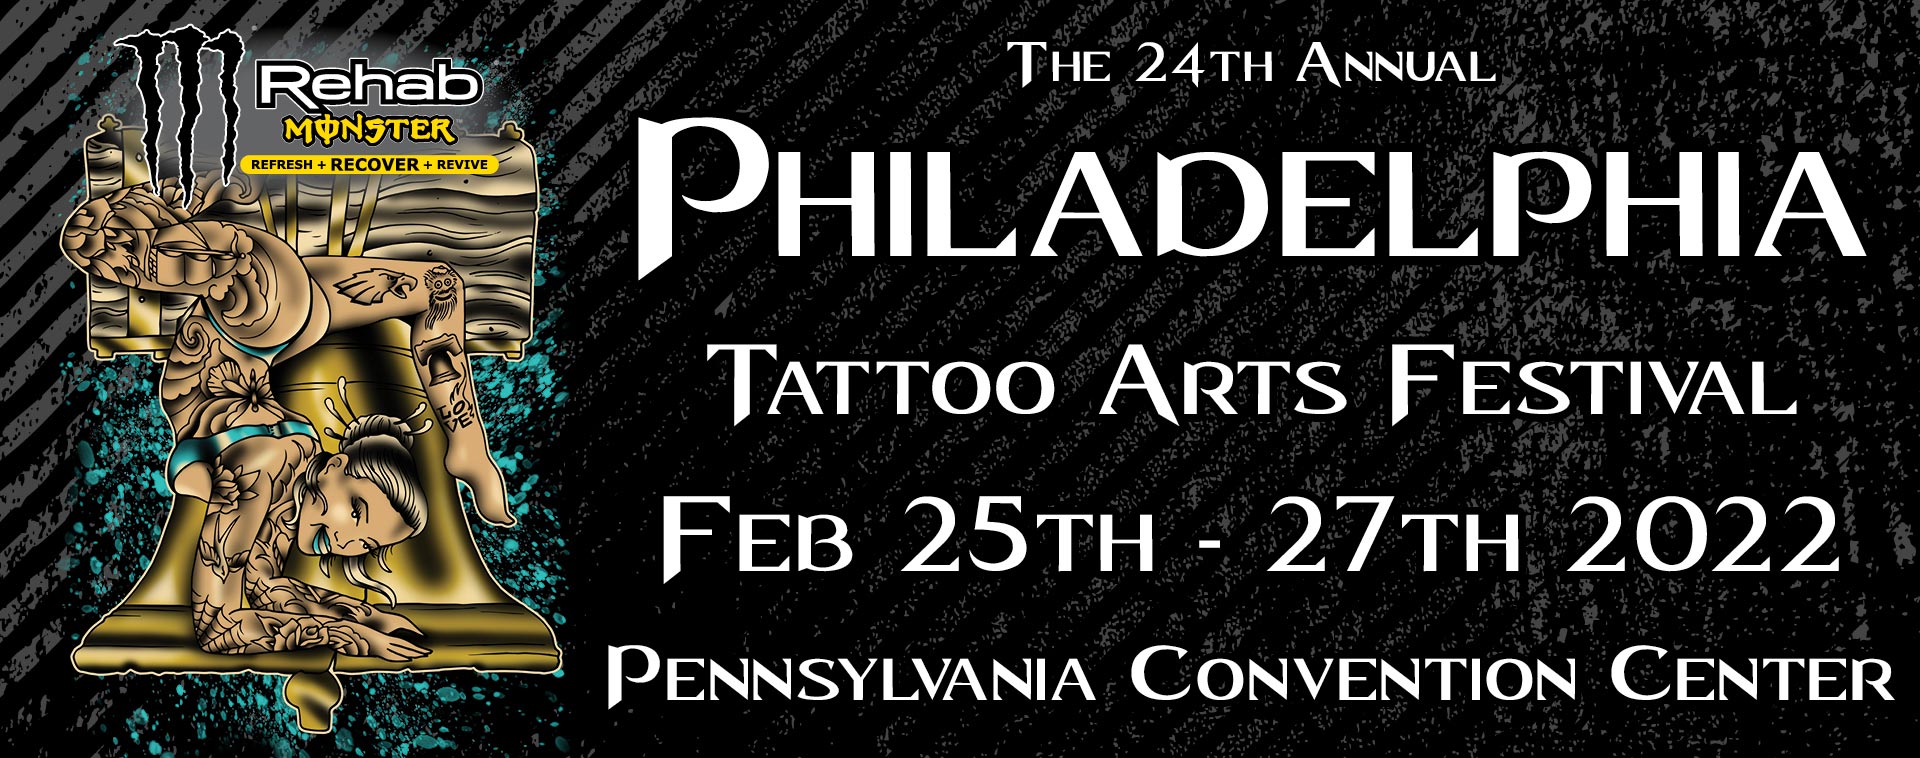 Villain Arts Tattoo Festivals on Instagram stephcurrency will be  joining villainarts for the 12th Annual Chicago Tattoo Arts Festival  March 18th  20th 2022 BOOKING APPOINTMENTS NOW PLEASE CONTACT THE  ARTIST DIRECTLY